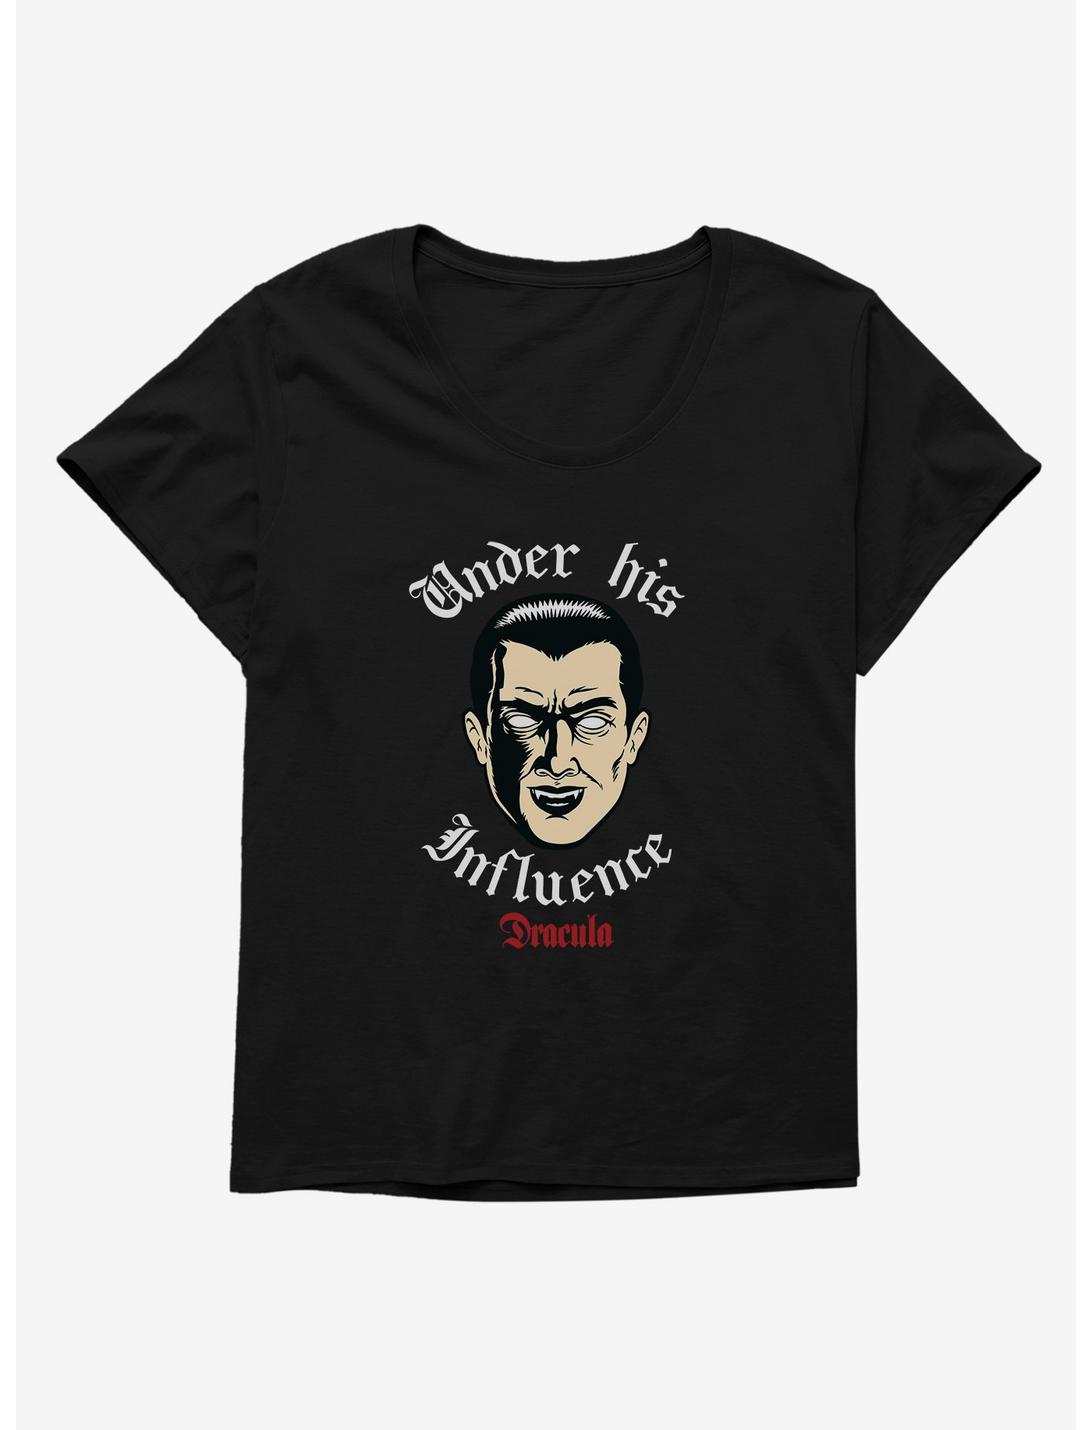 Universal Monsters Dracula Under His Influence Womens T-Shirt Plus Size, BLACK, hi-res